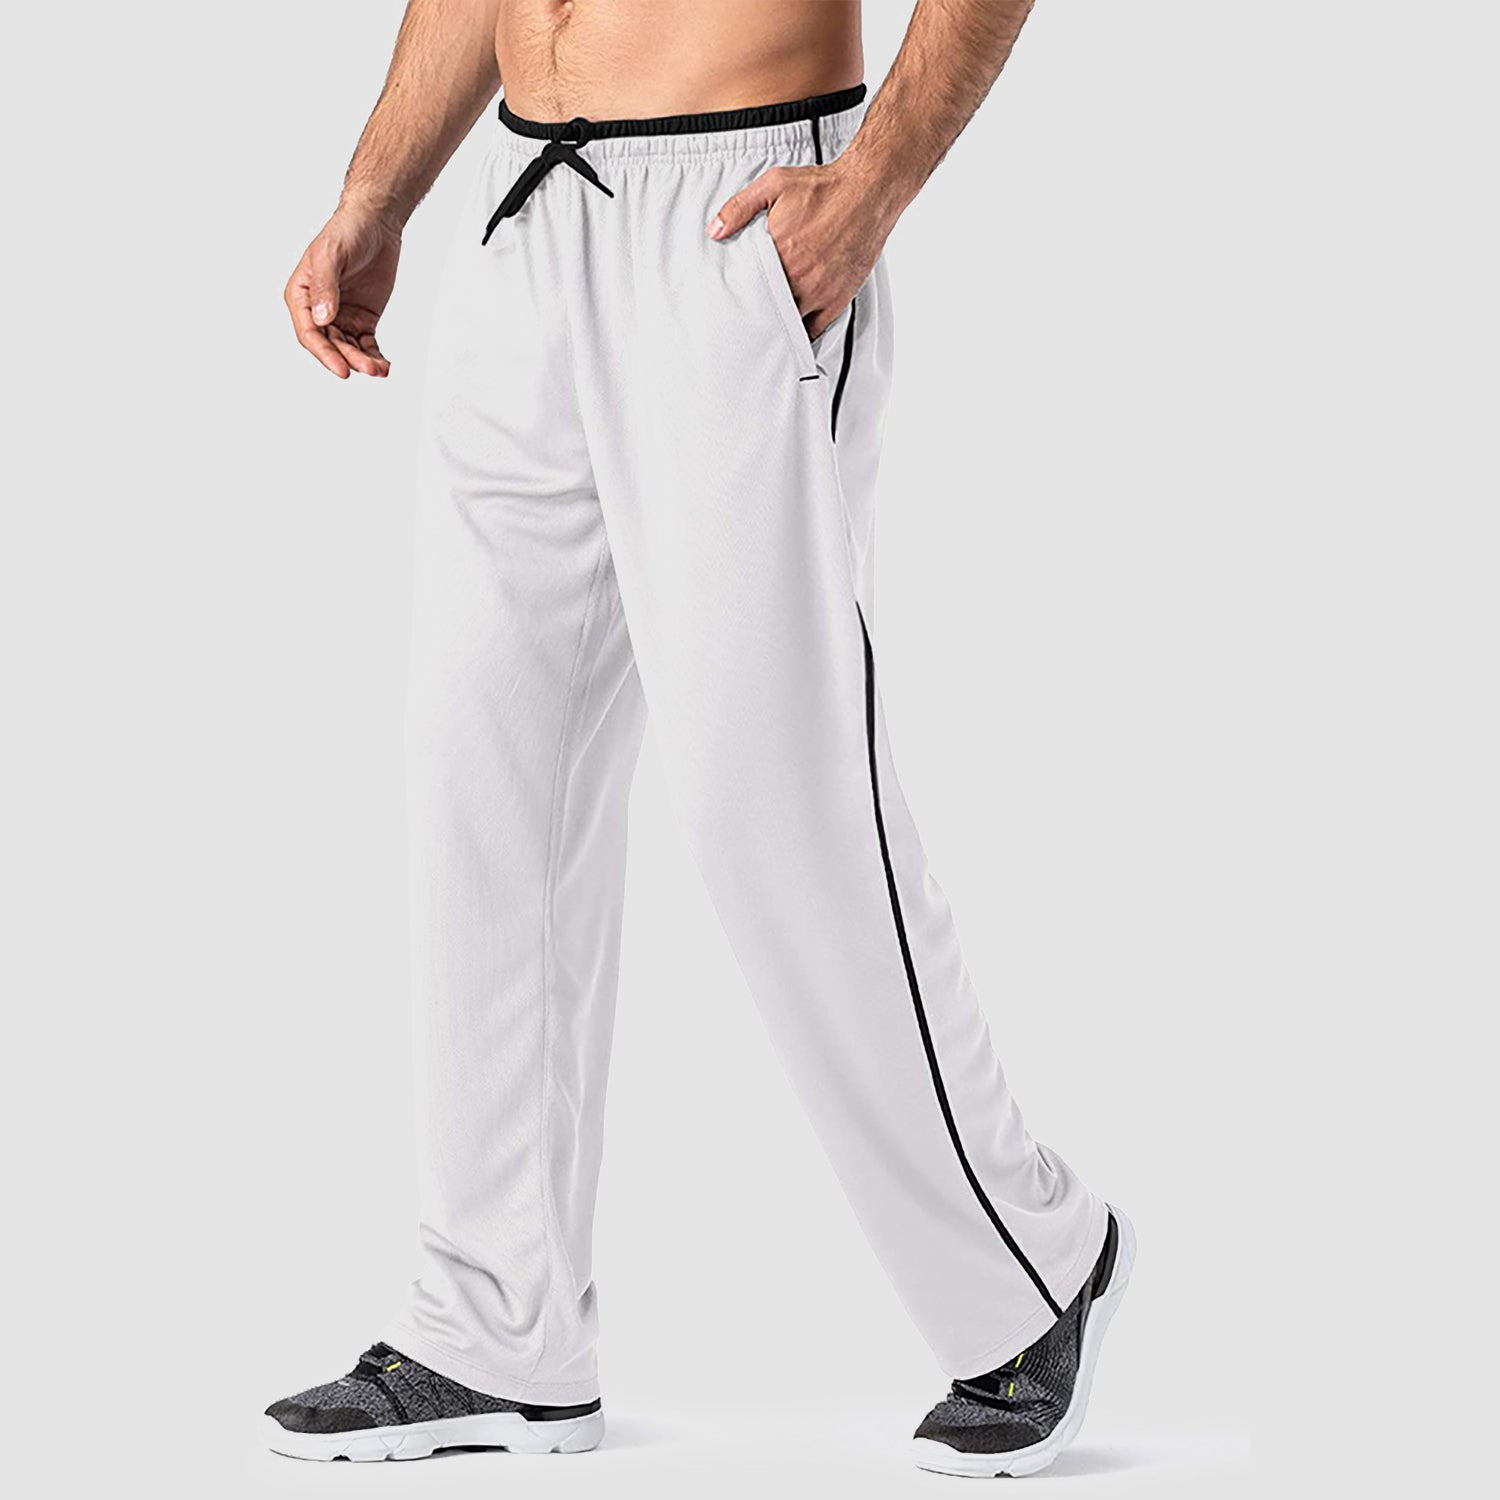 Lightweight Mesh Athletic Sweatpants for Men with Zipper Pockets and  Adjustable Waist | Perfect for Workout, Training, and Daily Wear